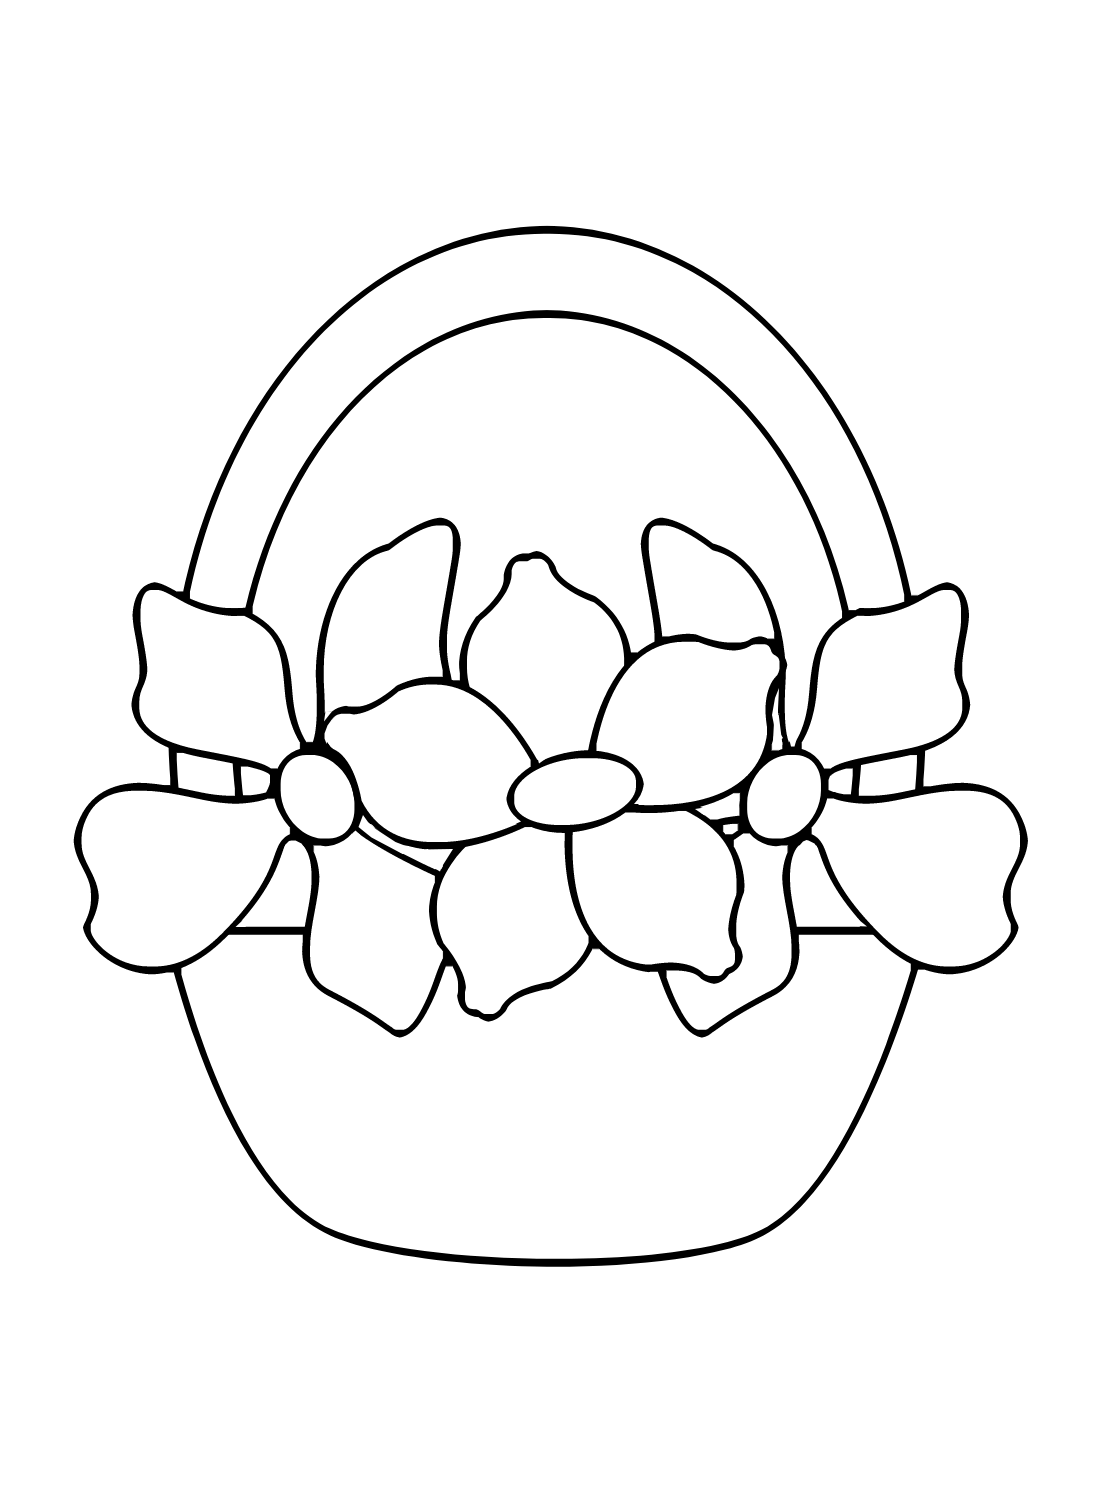 Simple Flower Basket Coloring Page